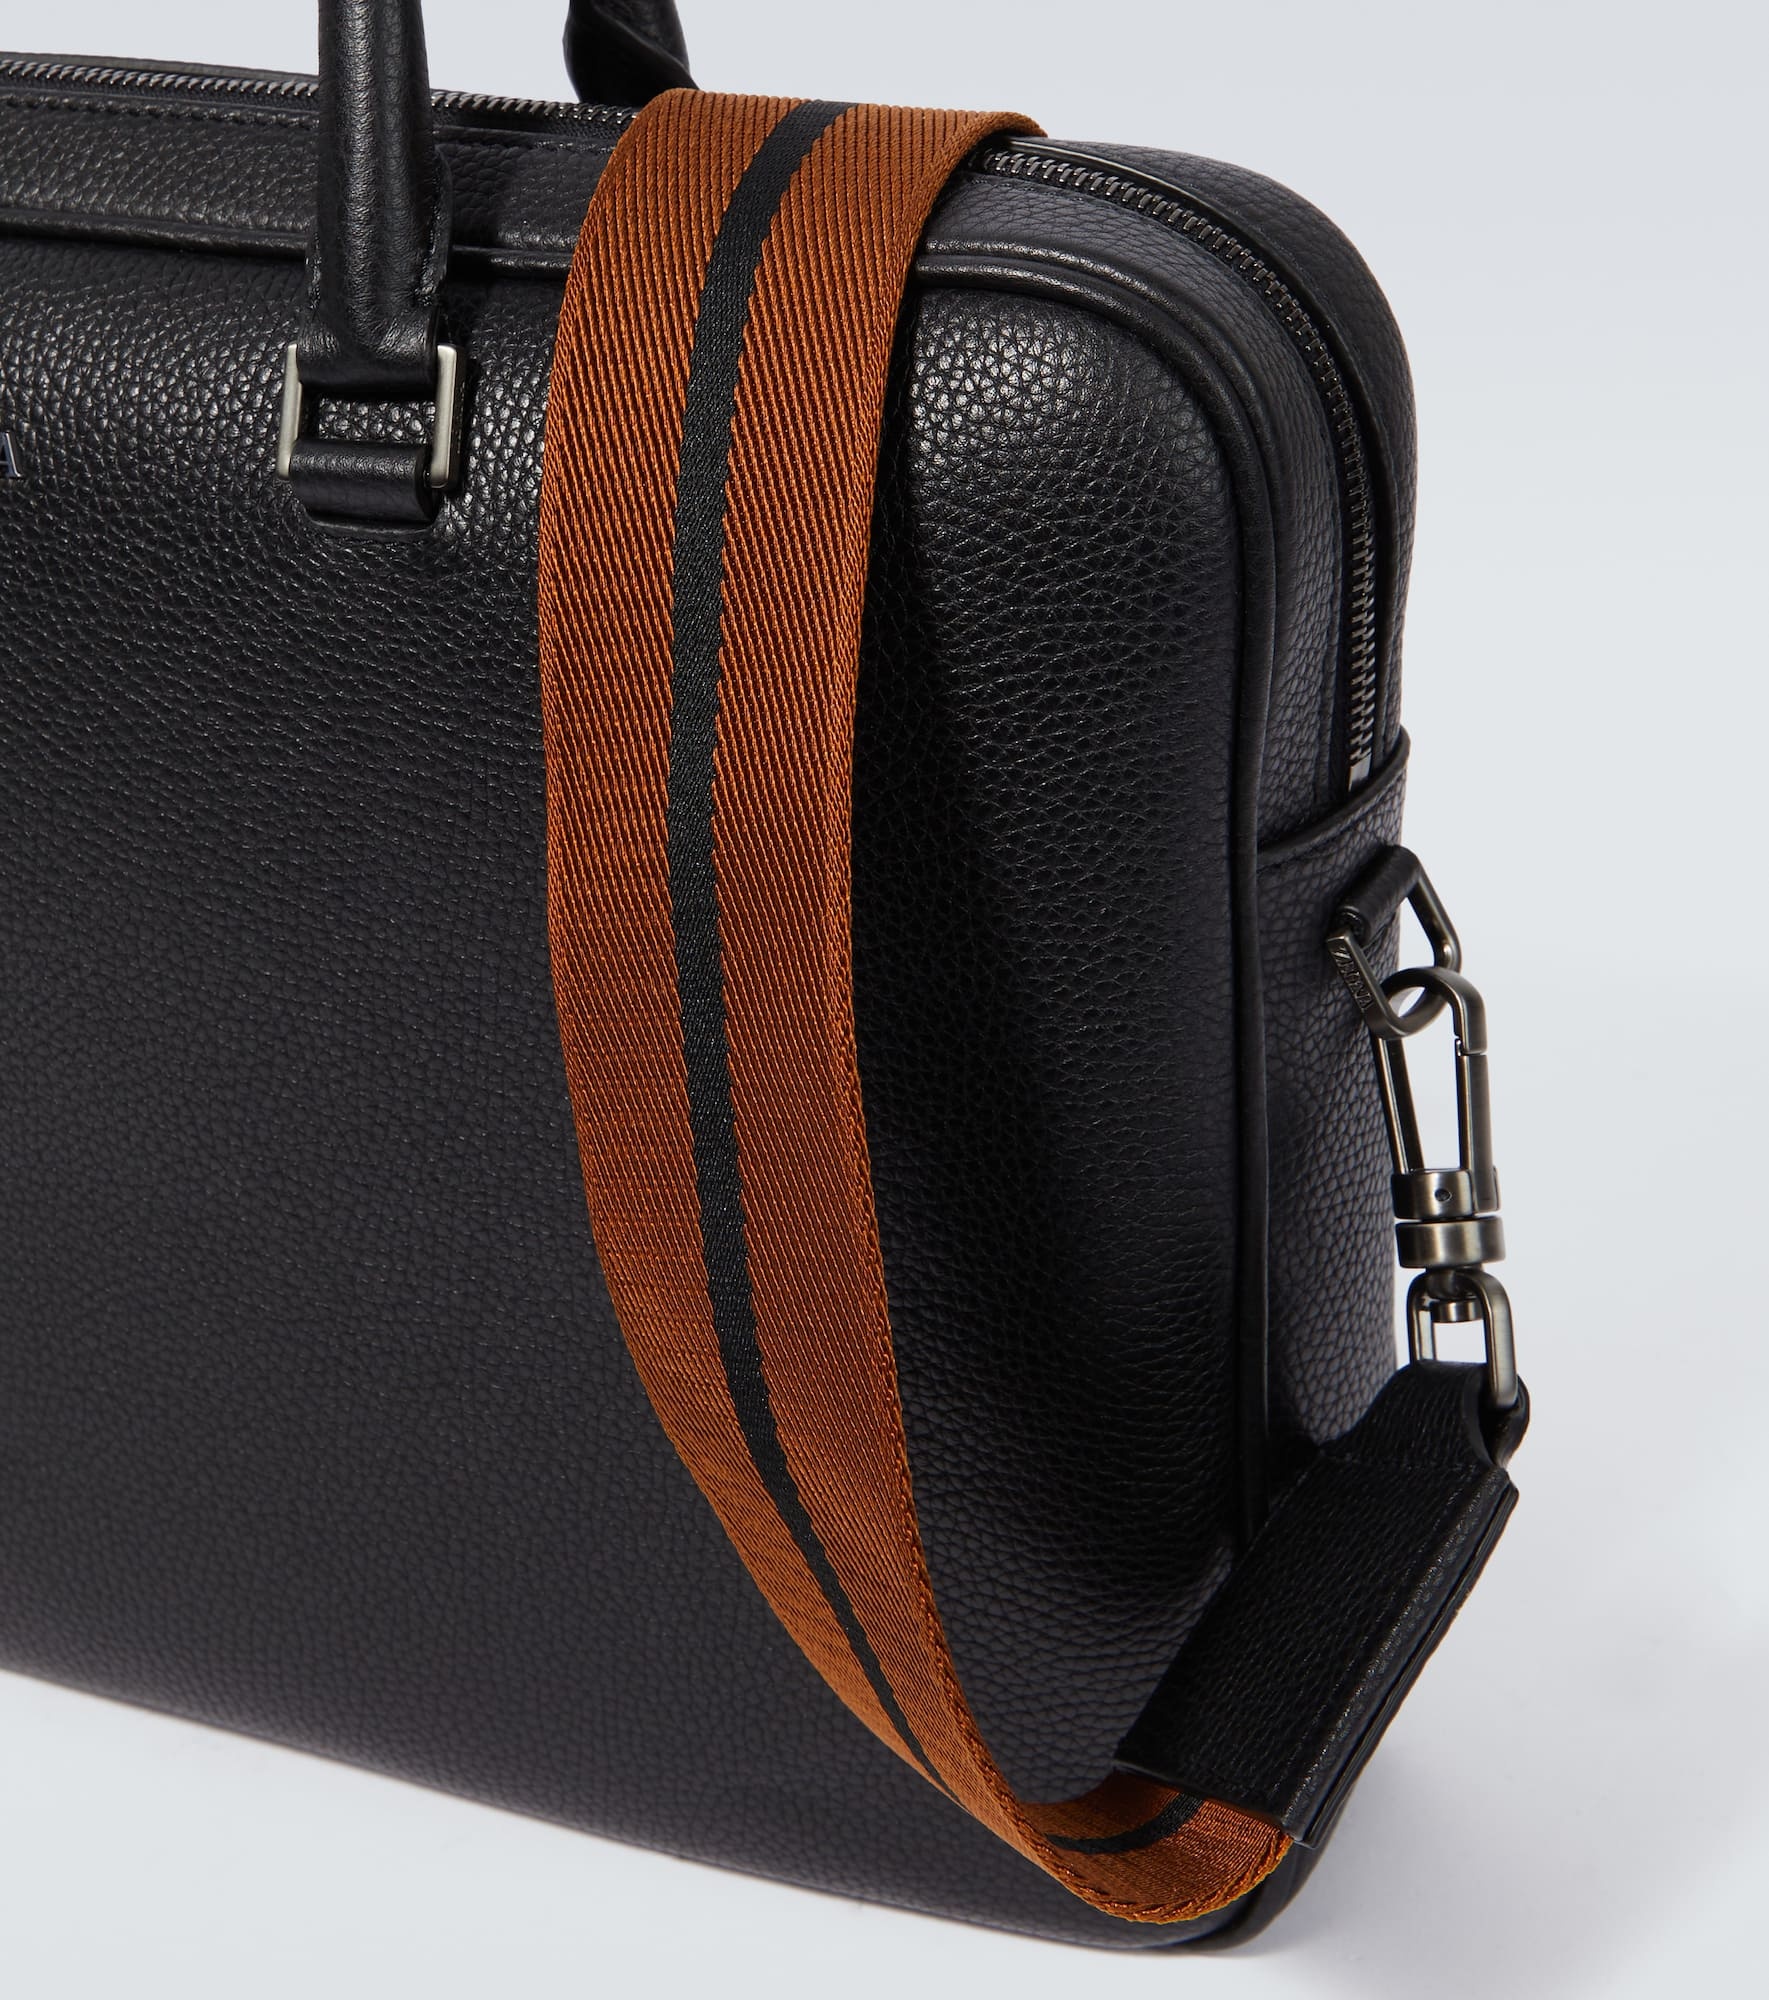 Edgy leather briefcase - 7